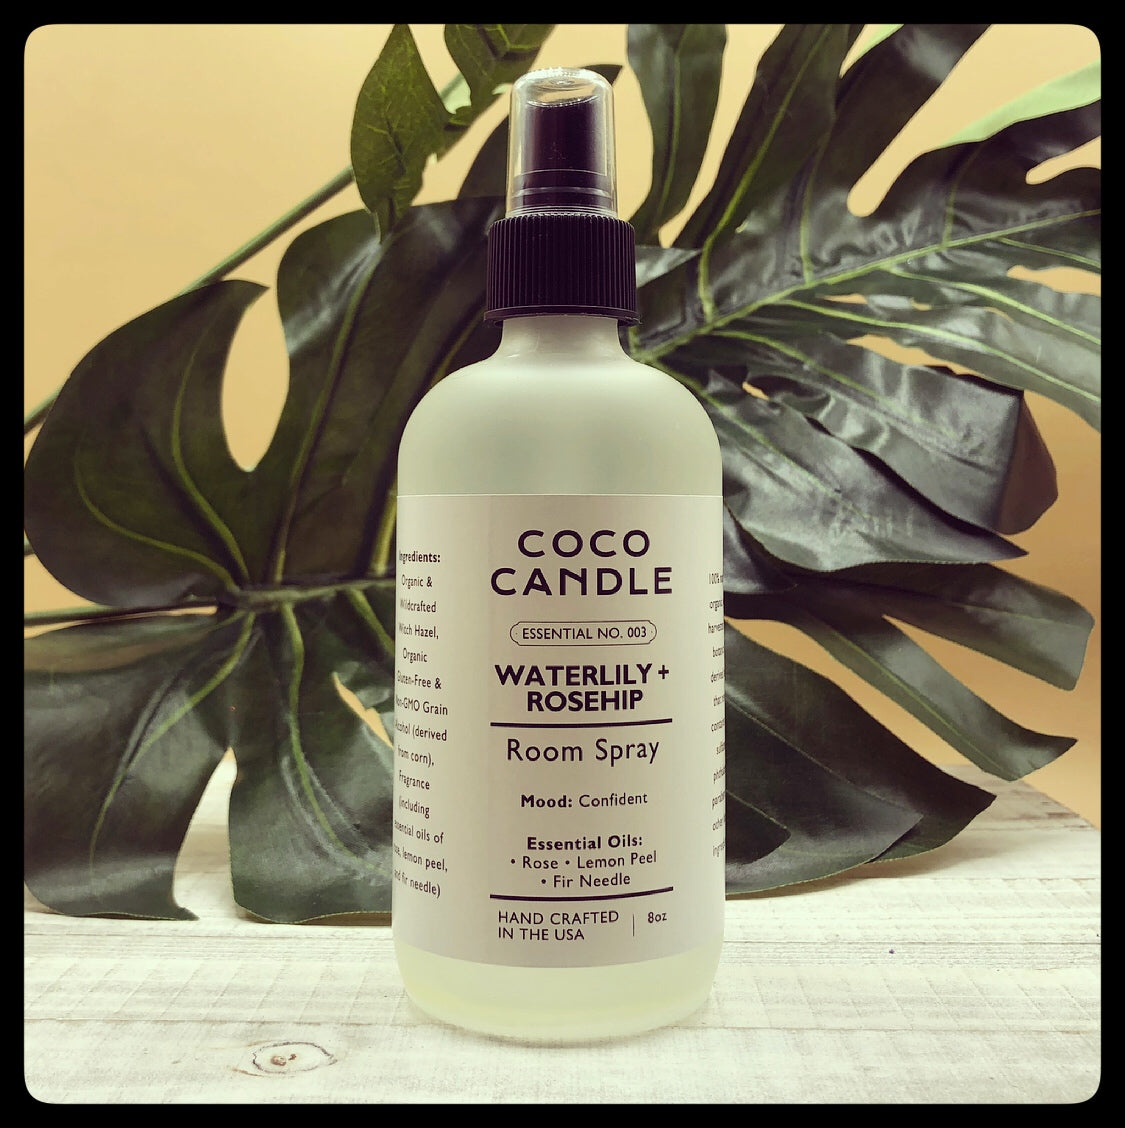 Waterlily + Rosehip:  Our room sprays are the perfect addition to your Coco Candle collection.  They are handcrafted with a 100% natural, organic, wild harvested and botanically derived base that never contains any sulfates, phthalates, Parabens or other harsh ingredients.  Just shake and spray to use!